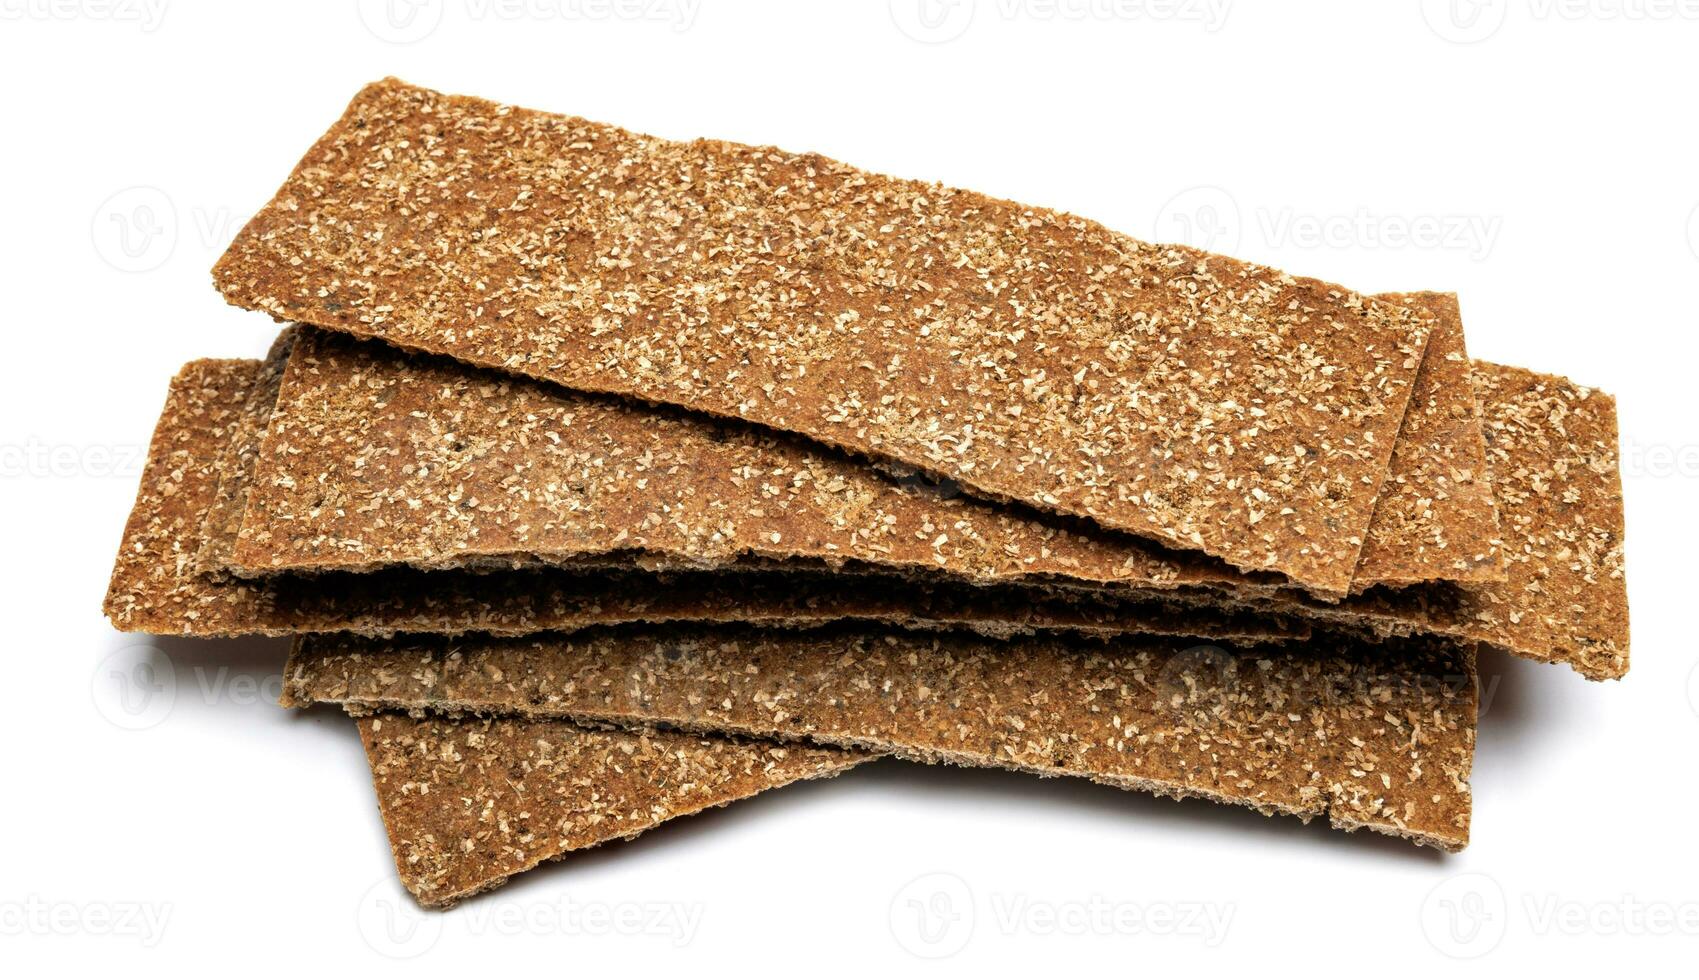 Slices of healthy low calories grain crisp bread for snack and crumbs on white background. photo